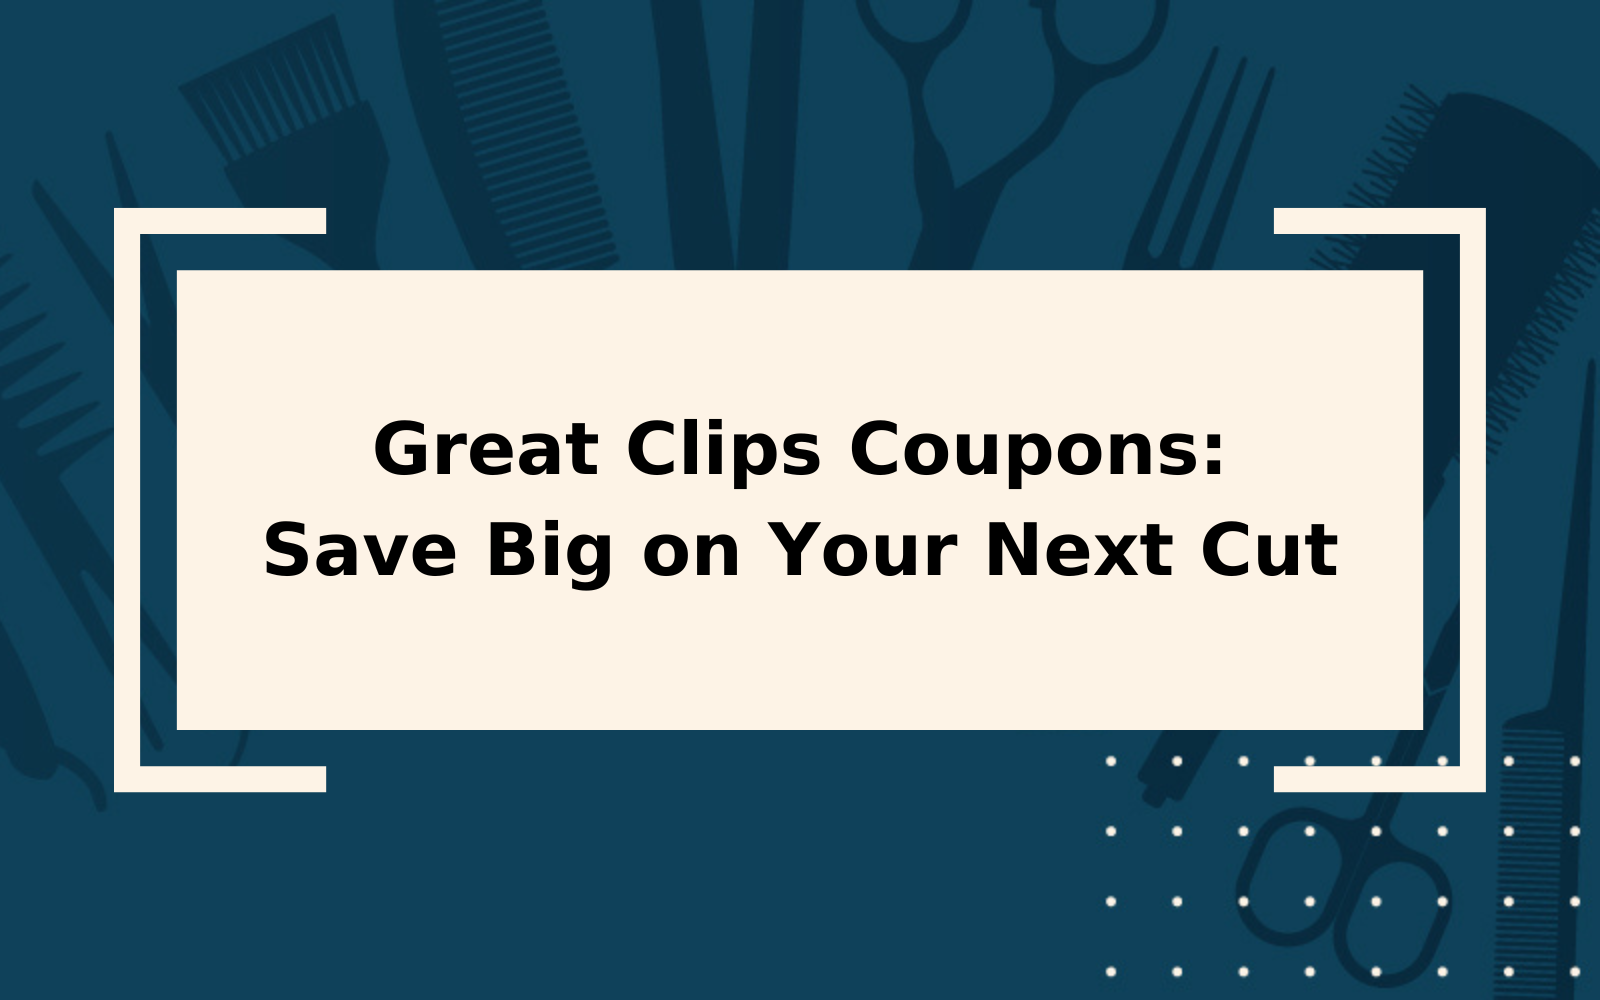 Great Clips Coupons | How to Save Big Money